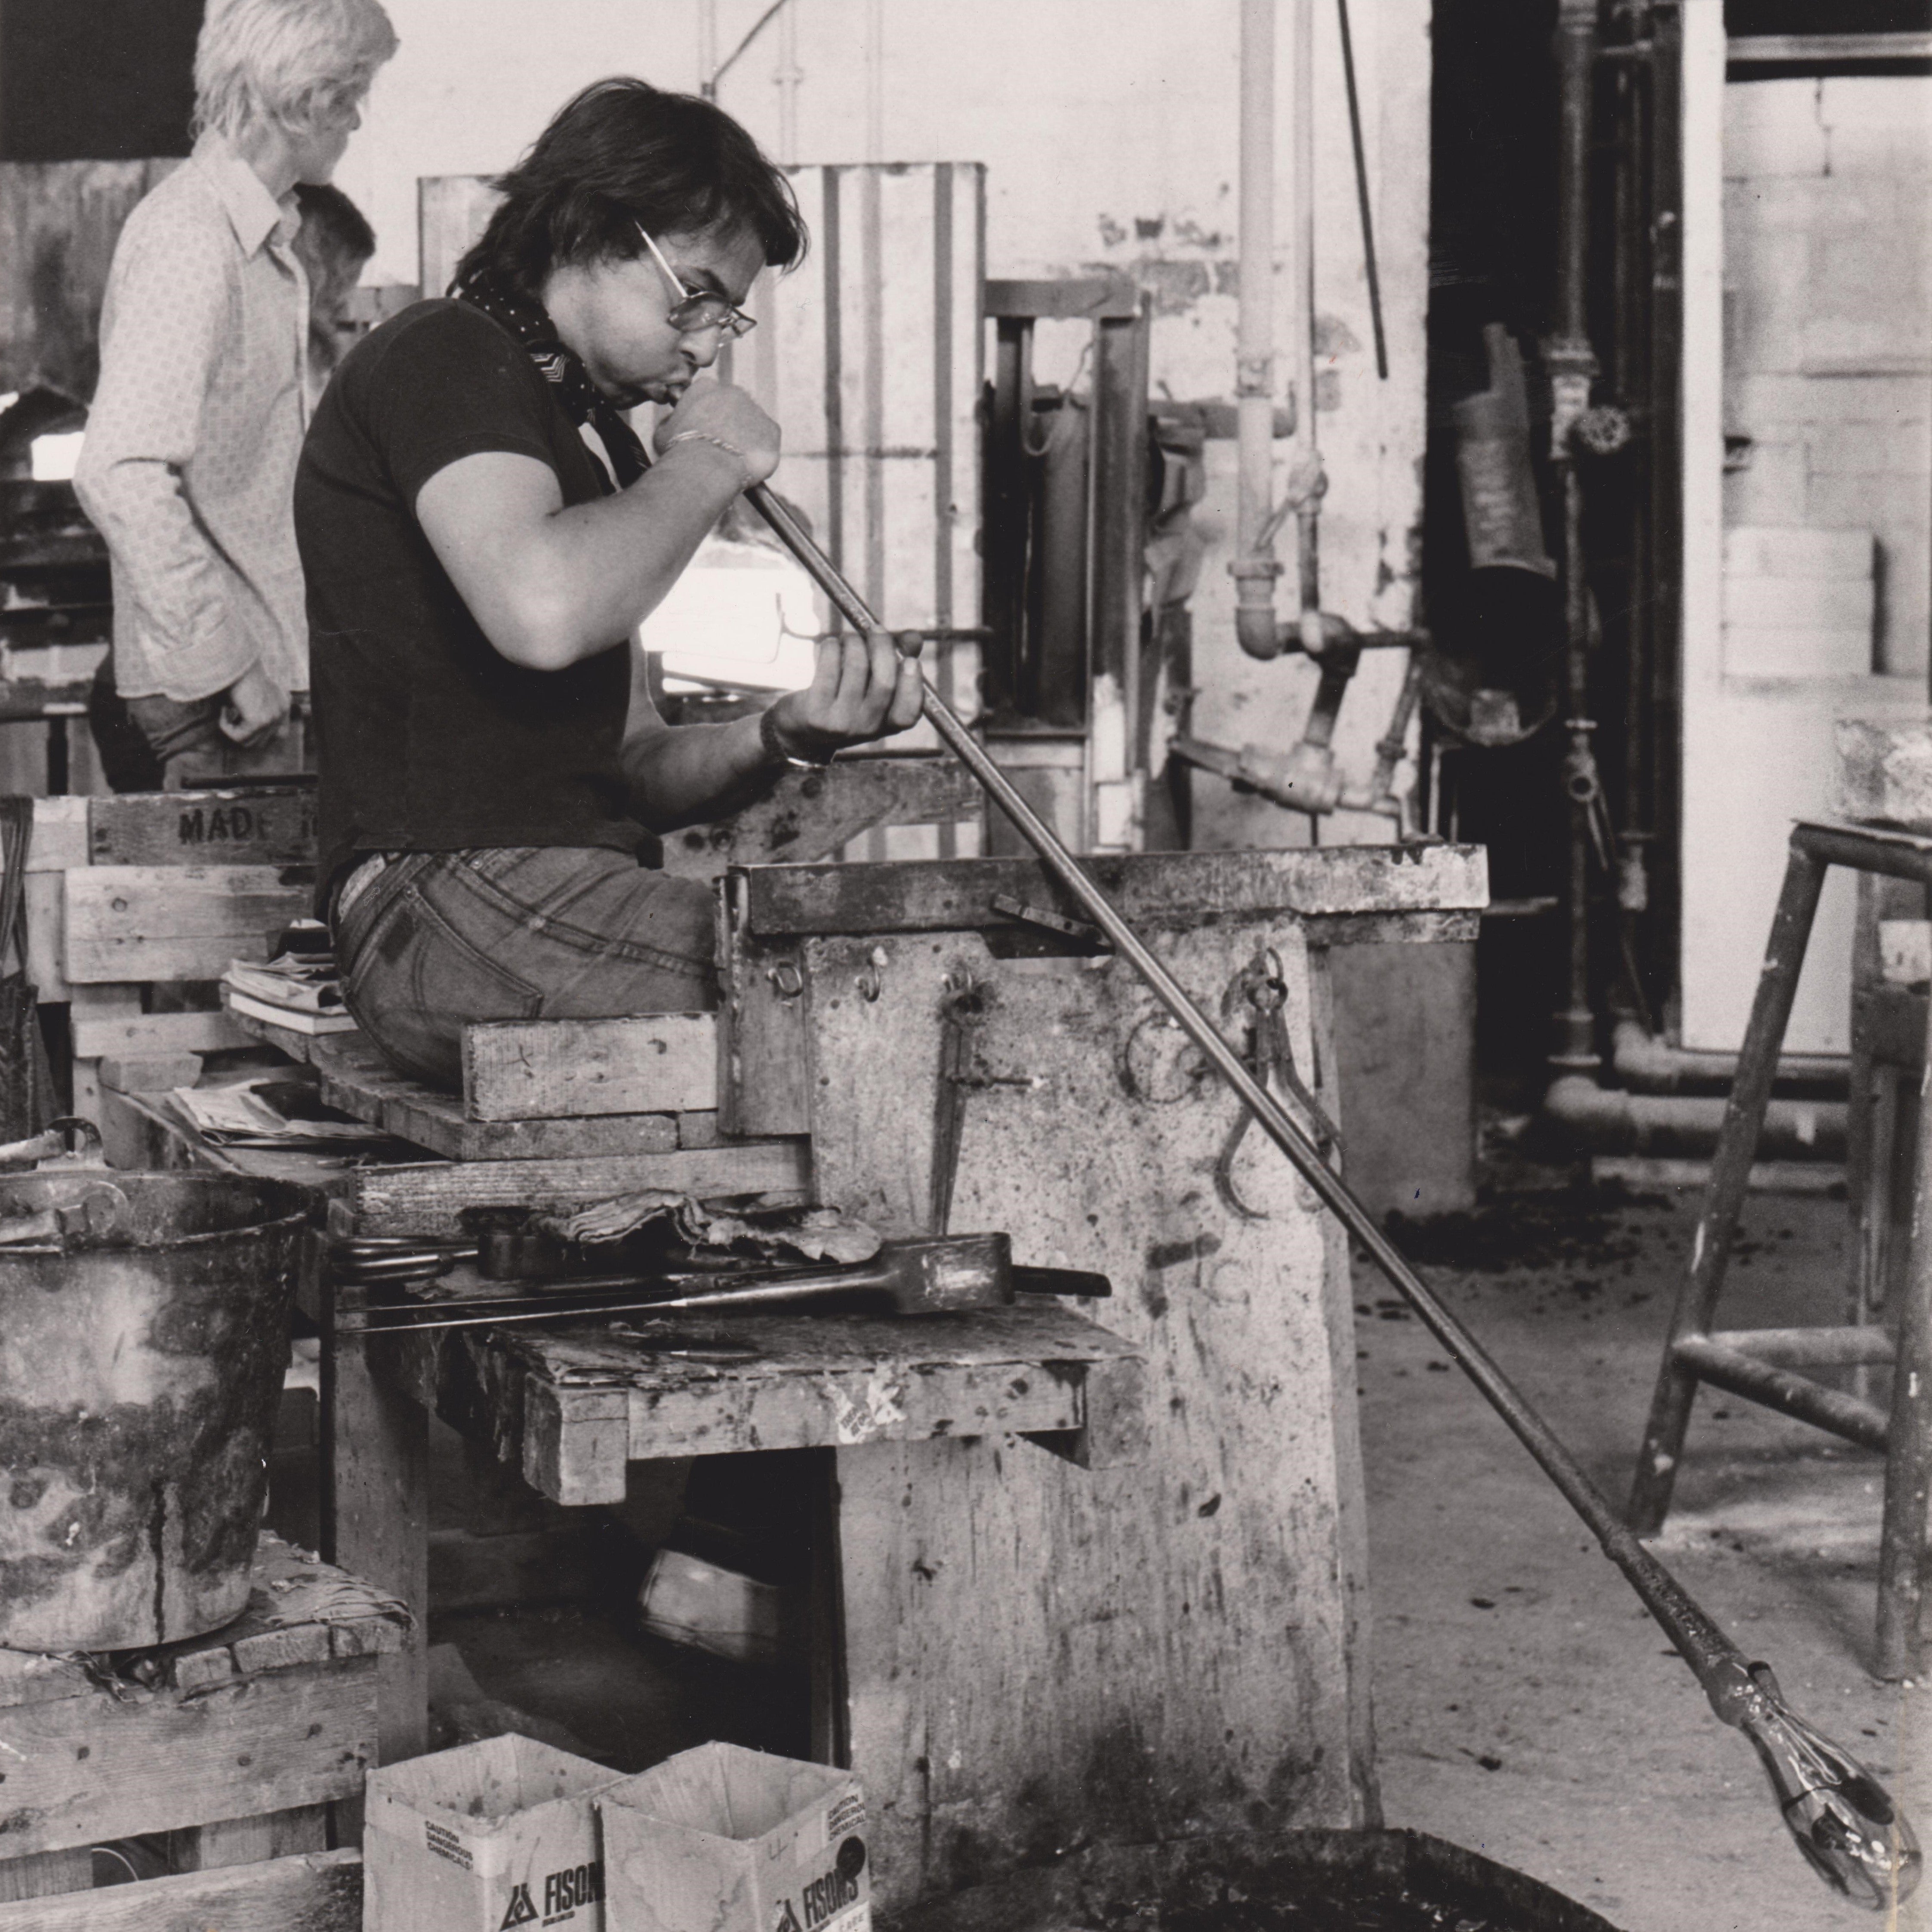 John blowing at the Venetain Glass Factory, Squires gate sometimes in the 1970's.